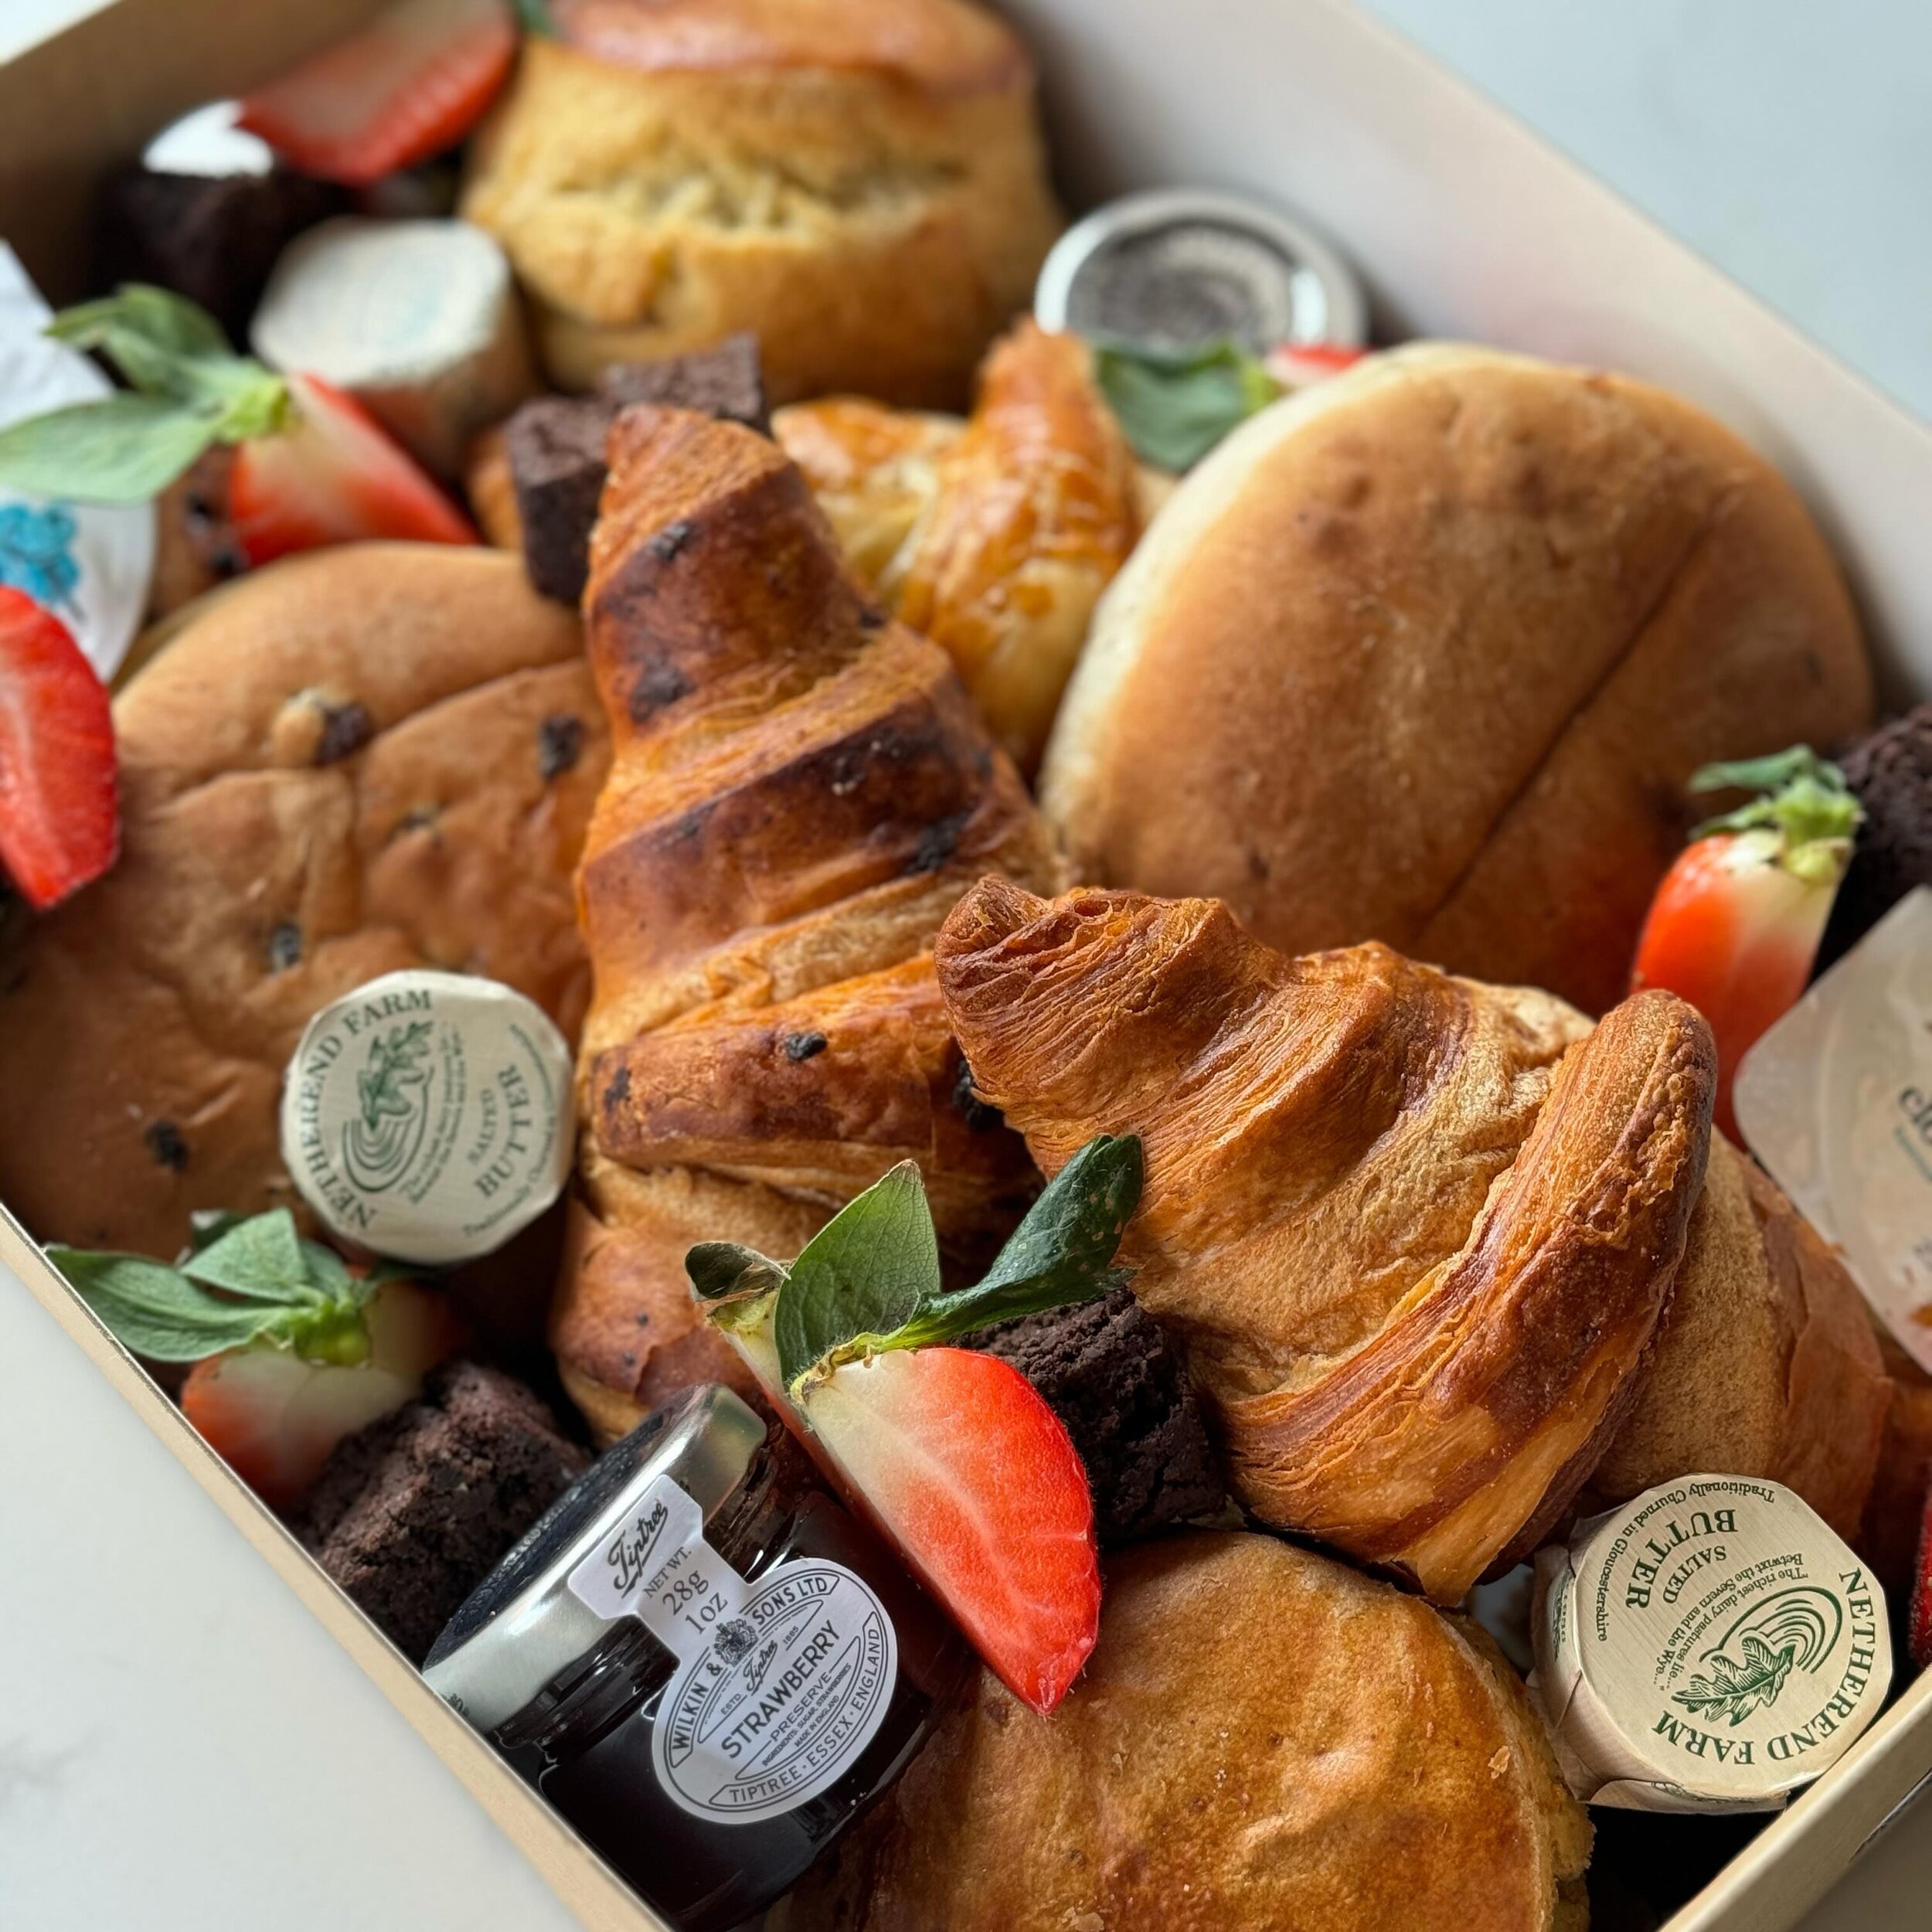 Introducing our Mother&rsquo;s Day breakfast box! ⁣
Available to order from our Warley Deli this Mother&rsquo;s Day 📍🌷⁣
⁣
Breakfast in bed? We&rsquo;ve got you covered 🥐 🍓 Packed with freshly baked croissants, tea cakes and Tiptree jam. Homemade 